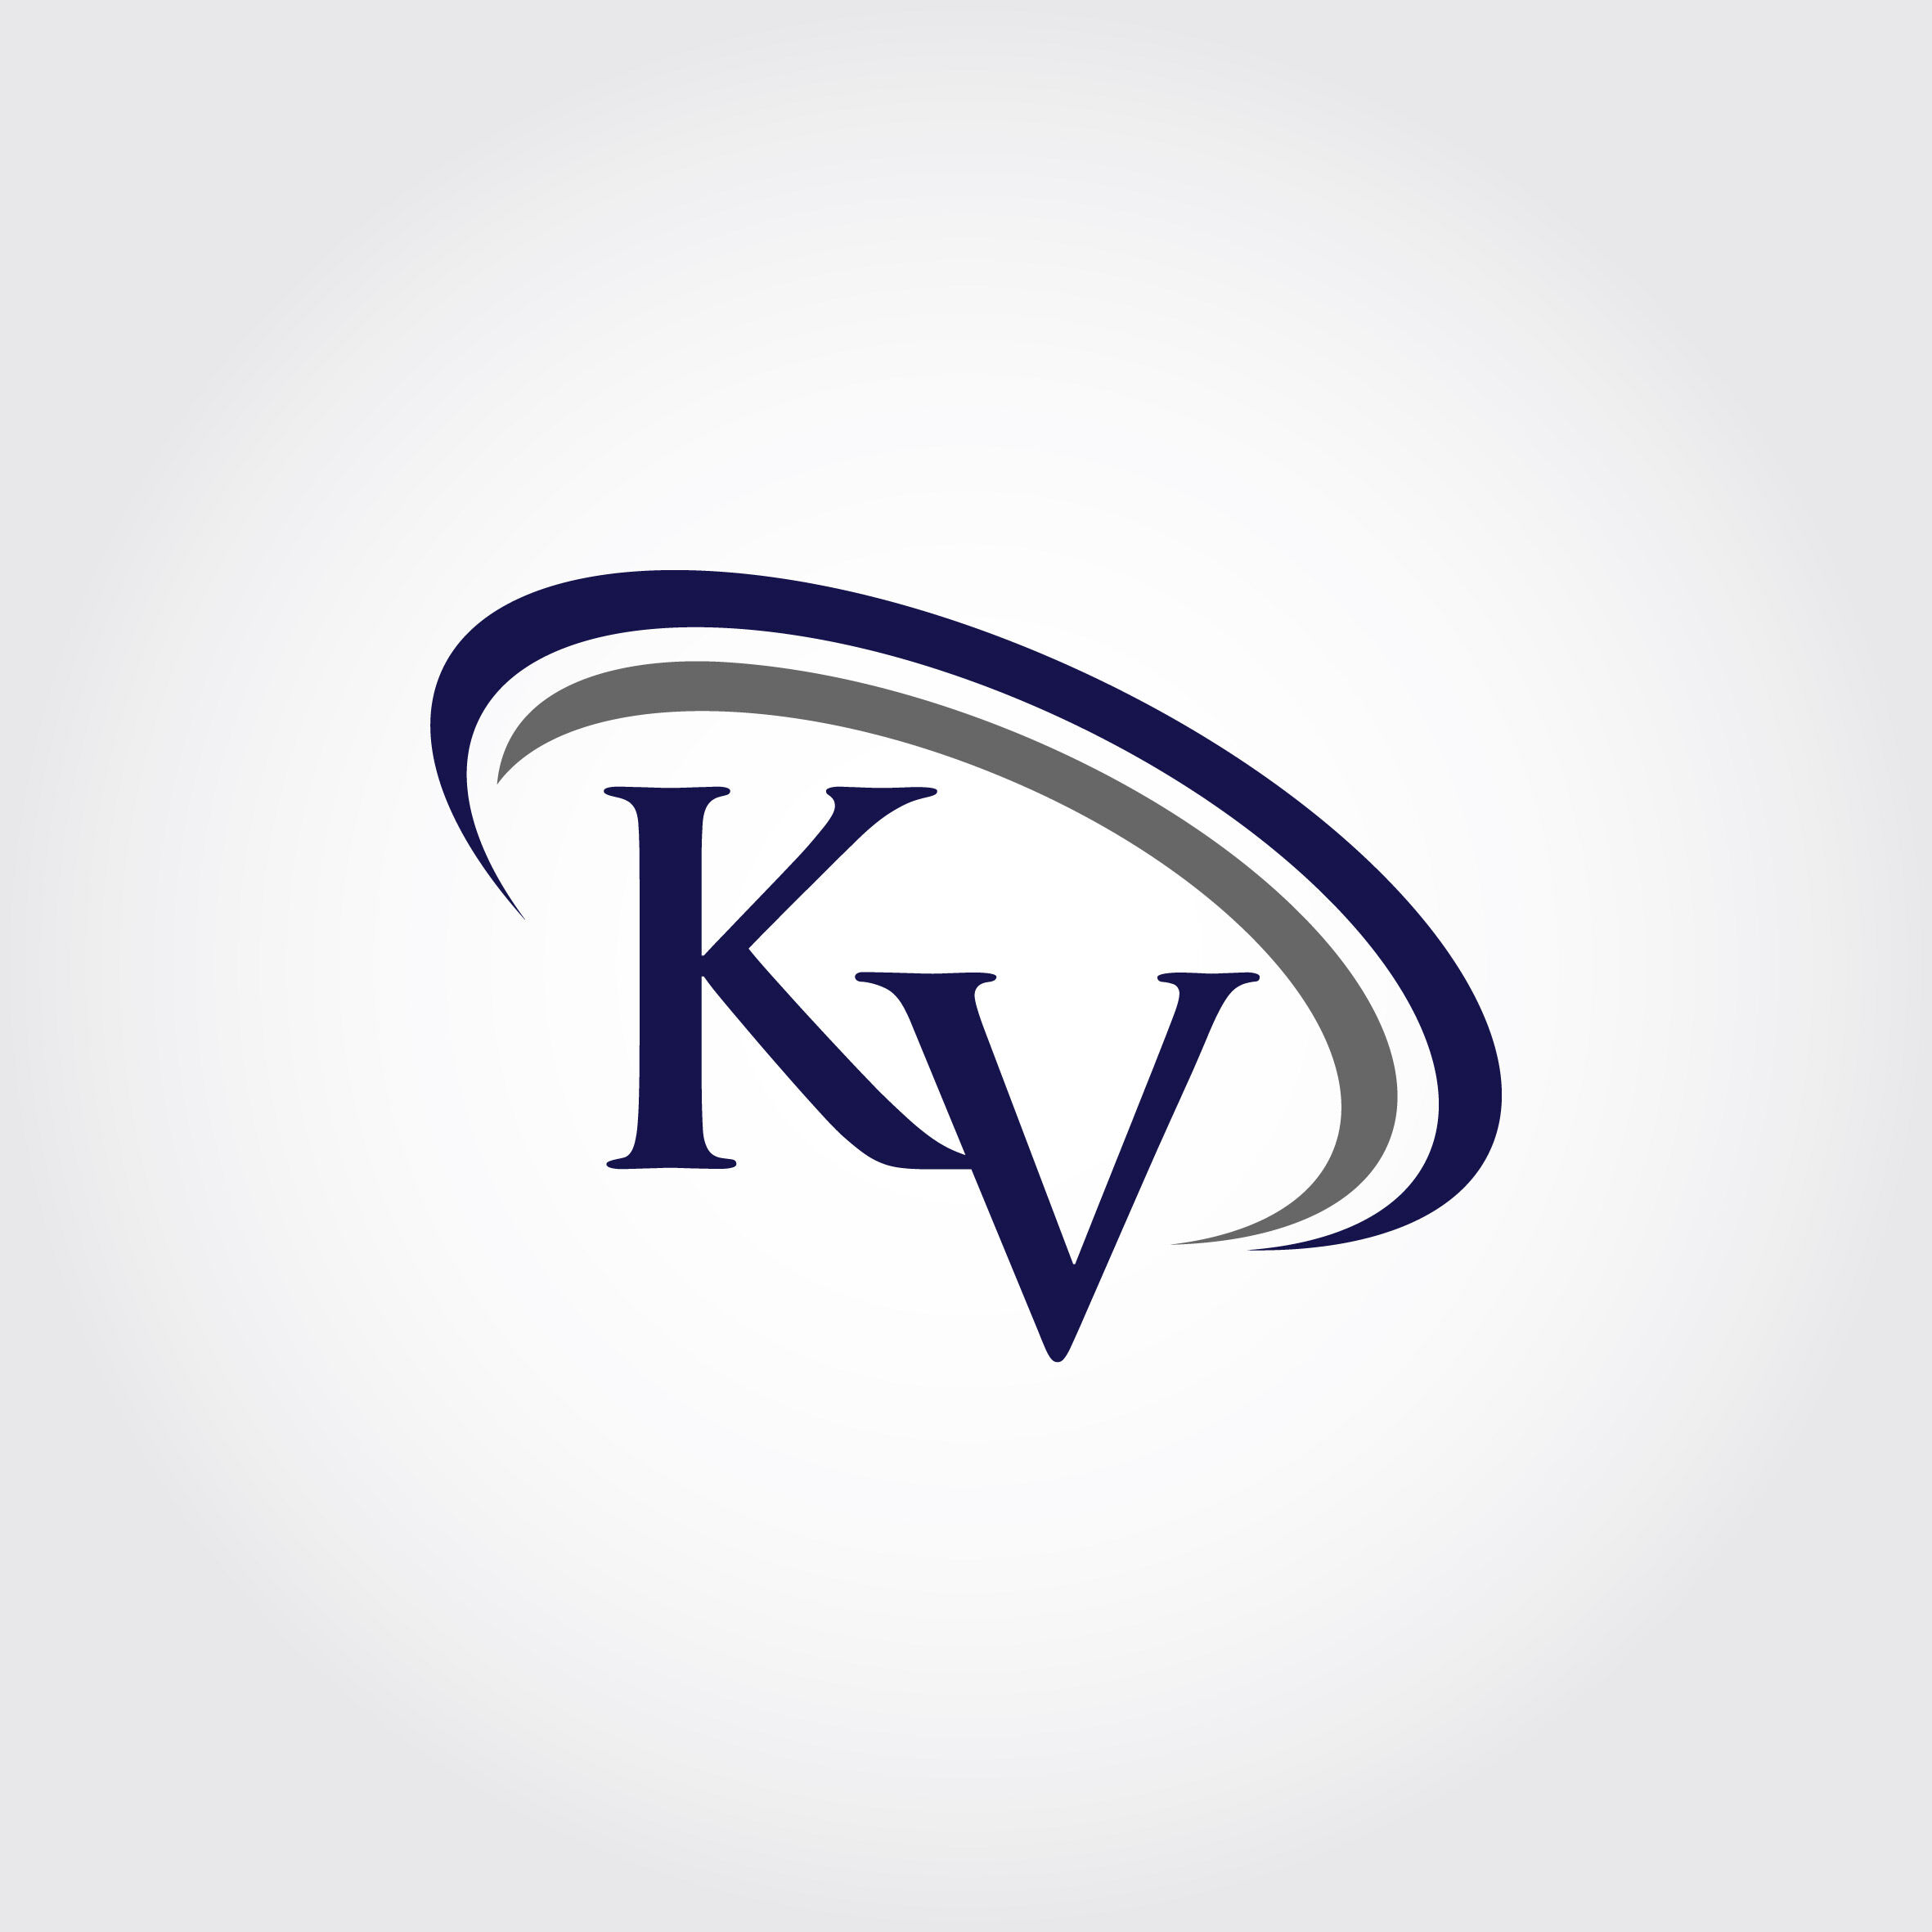 Bold Serious Construction Logo Design for KV STONE GROUP OR KVS by ning  sihh  Design 6142050